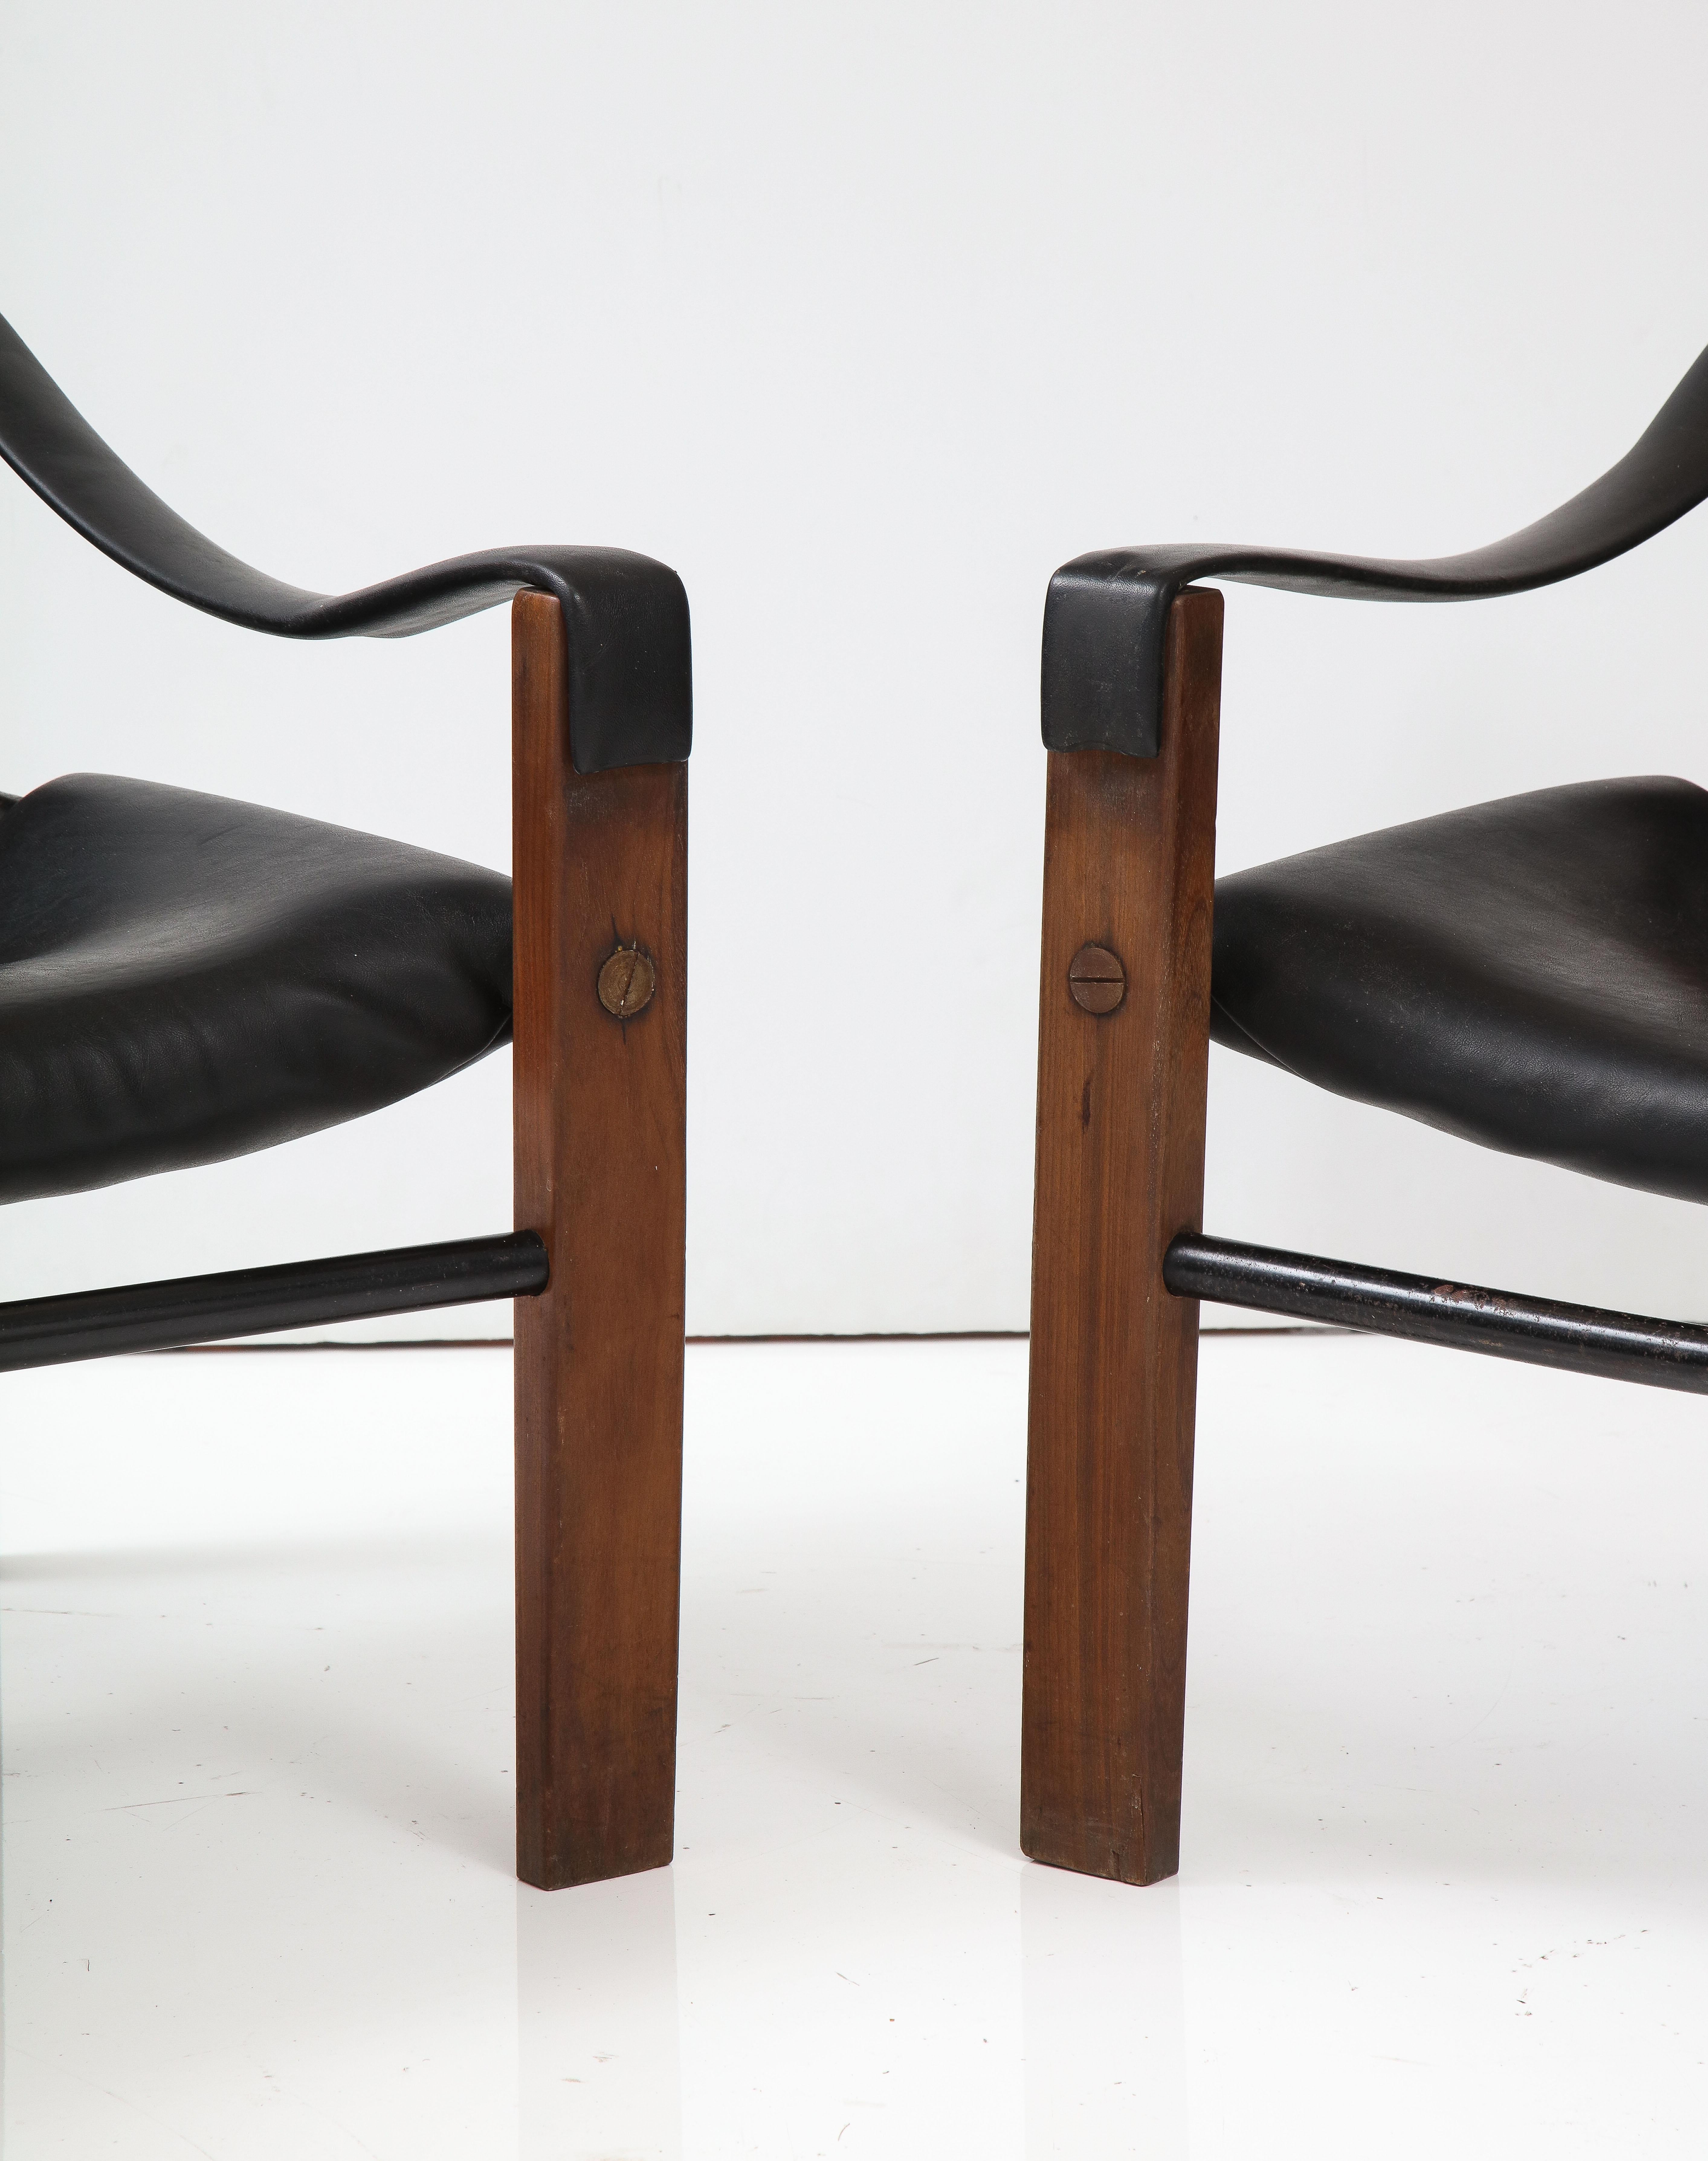 Wonderful pair of vintage teak wood and faux black leather 'Safari' arm chairs supported on black metal frames, designed by Maurice Burke for British furniture manufacturer Arkana, circa 1980. Original upholstery is in excellent condition with small